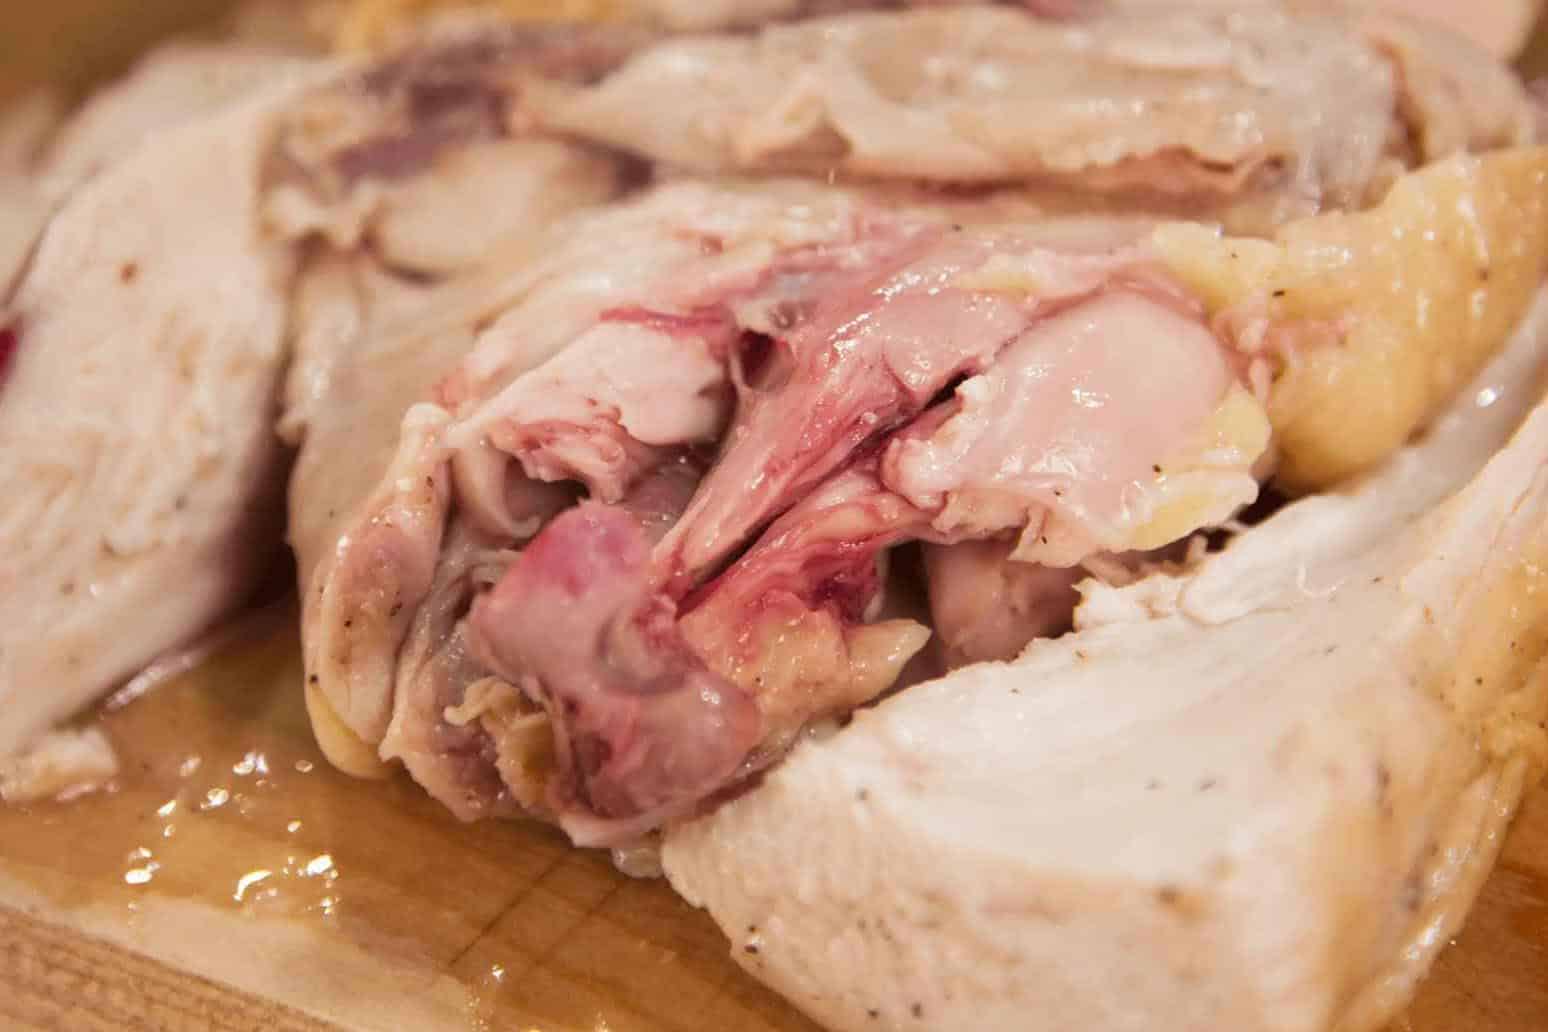 5 Tests to Tell if Chicken is Undercooked